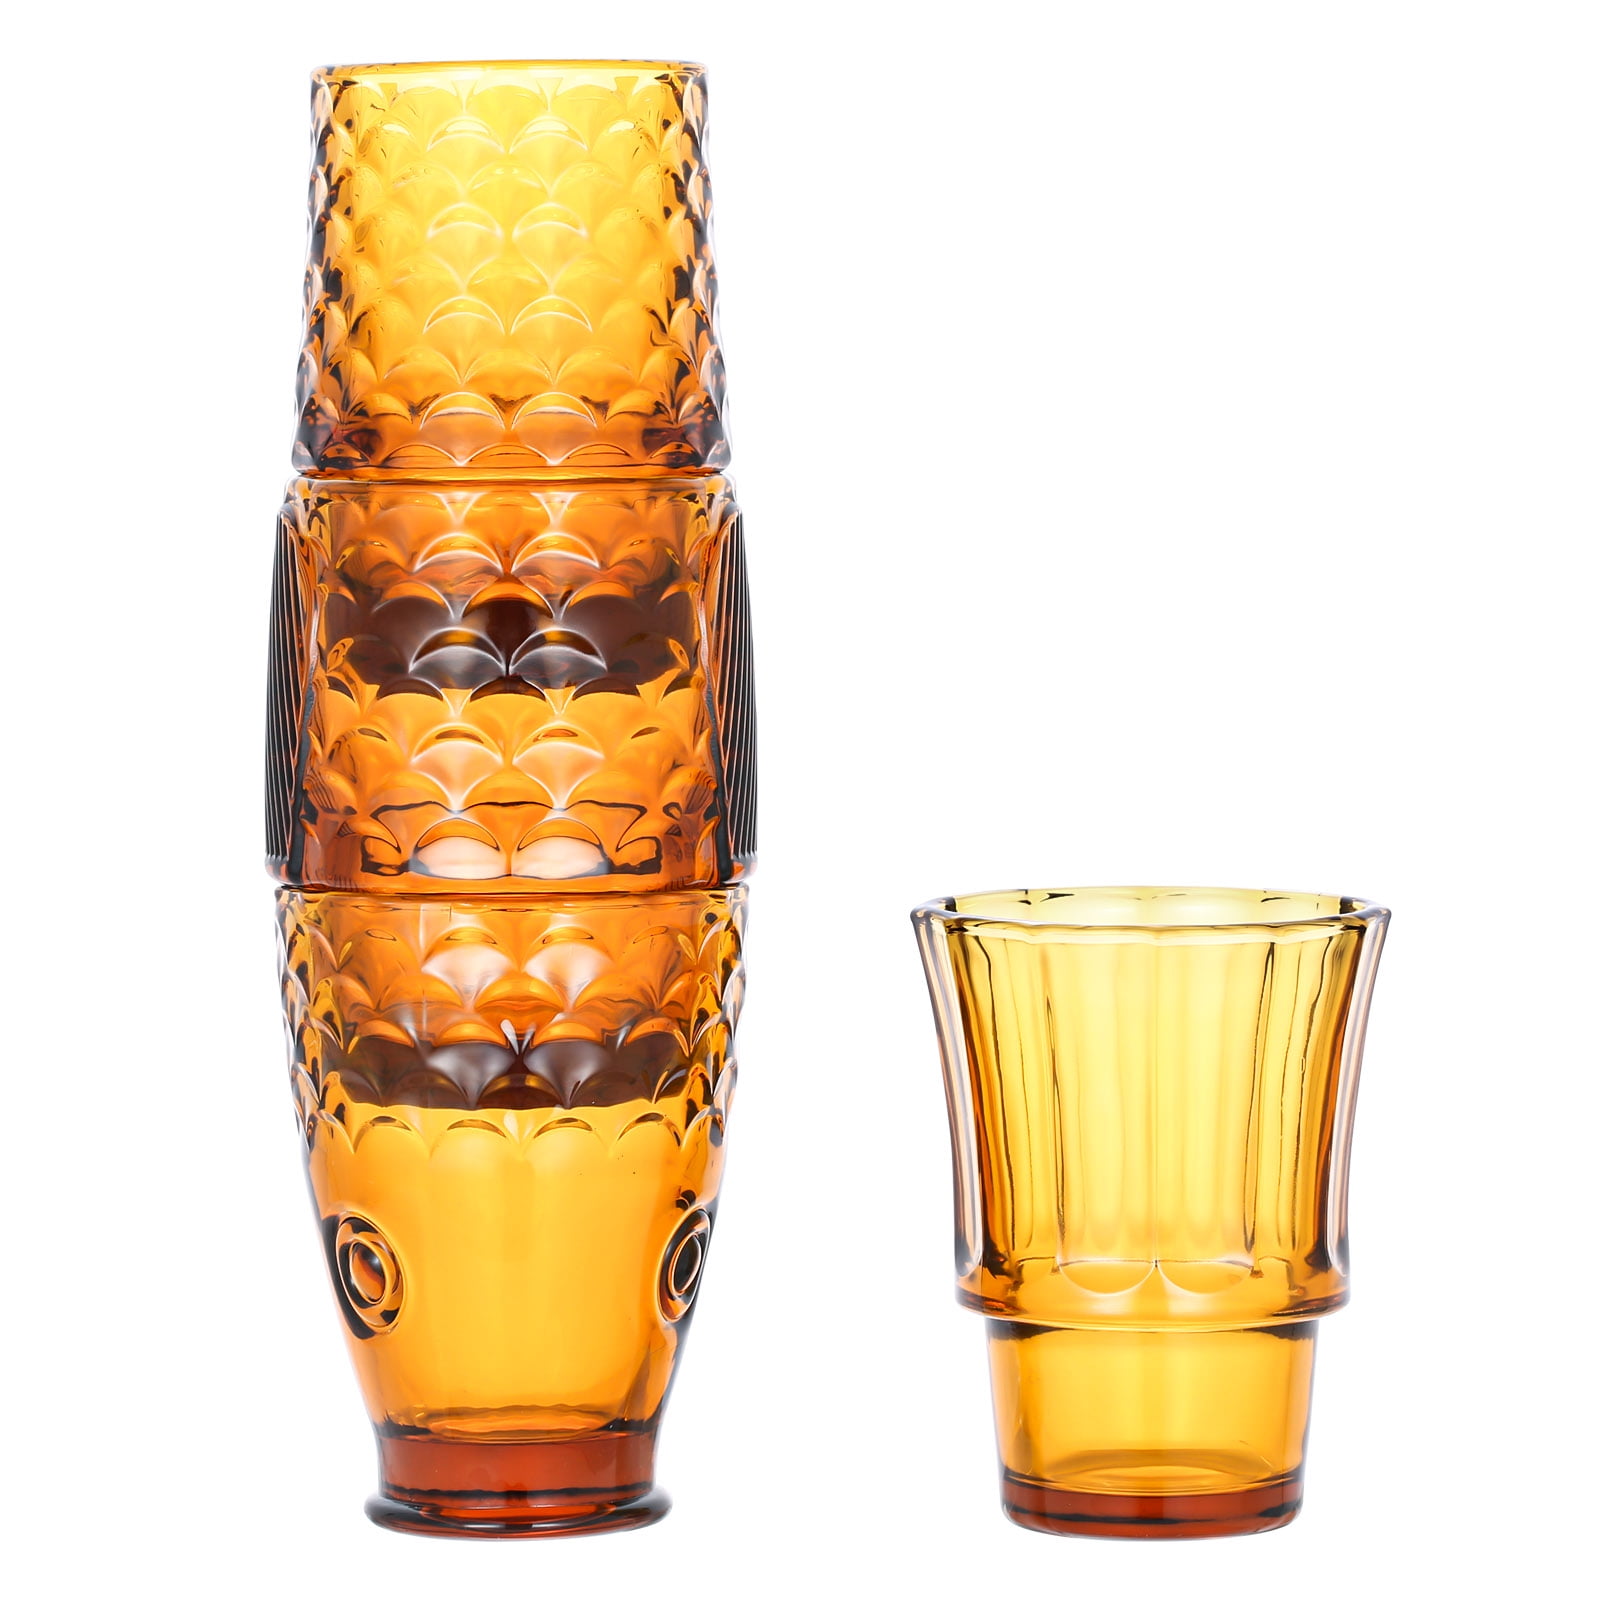 Stackable Drinking Glasses Amber MDLUU Fish Design Tumbler Glasses Colored Glass Beverage Cups Nautical Glassware for Gift Set of 4